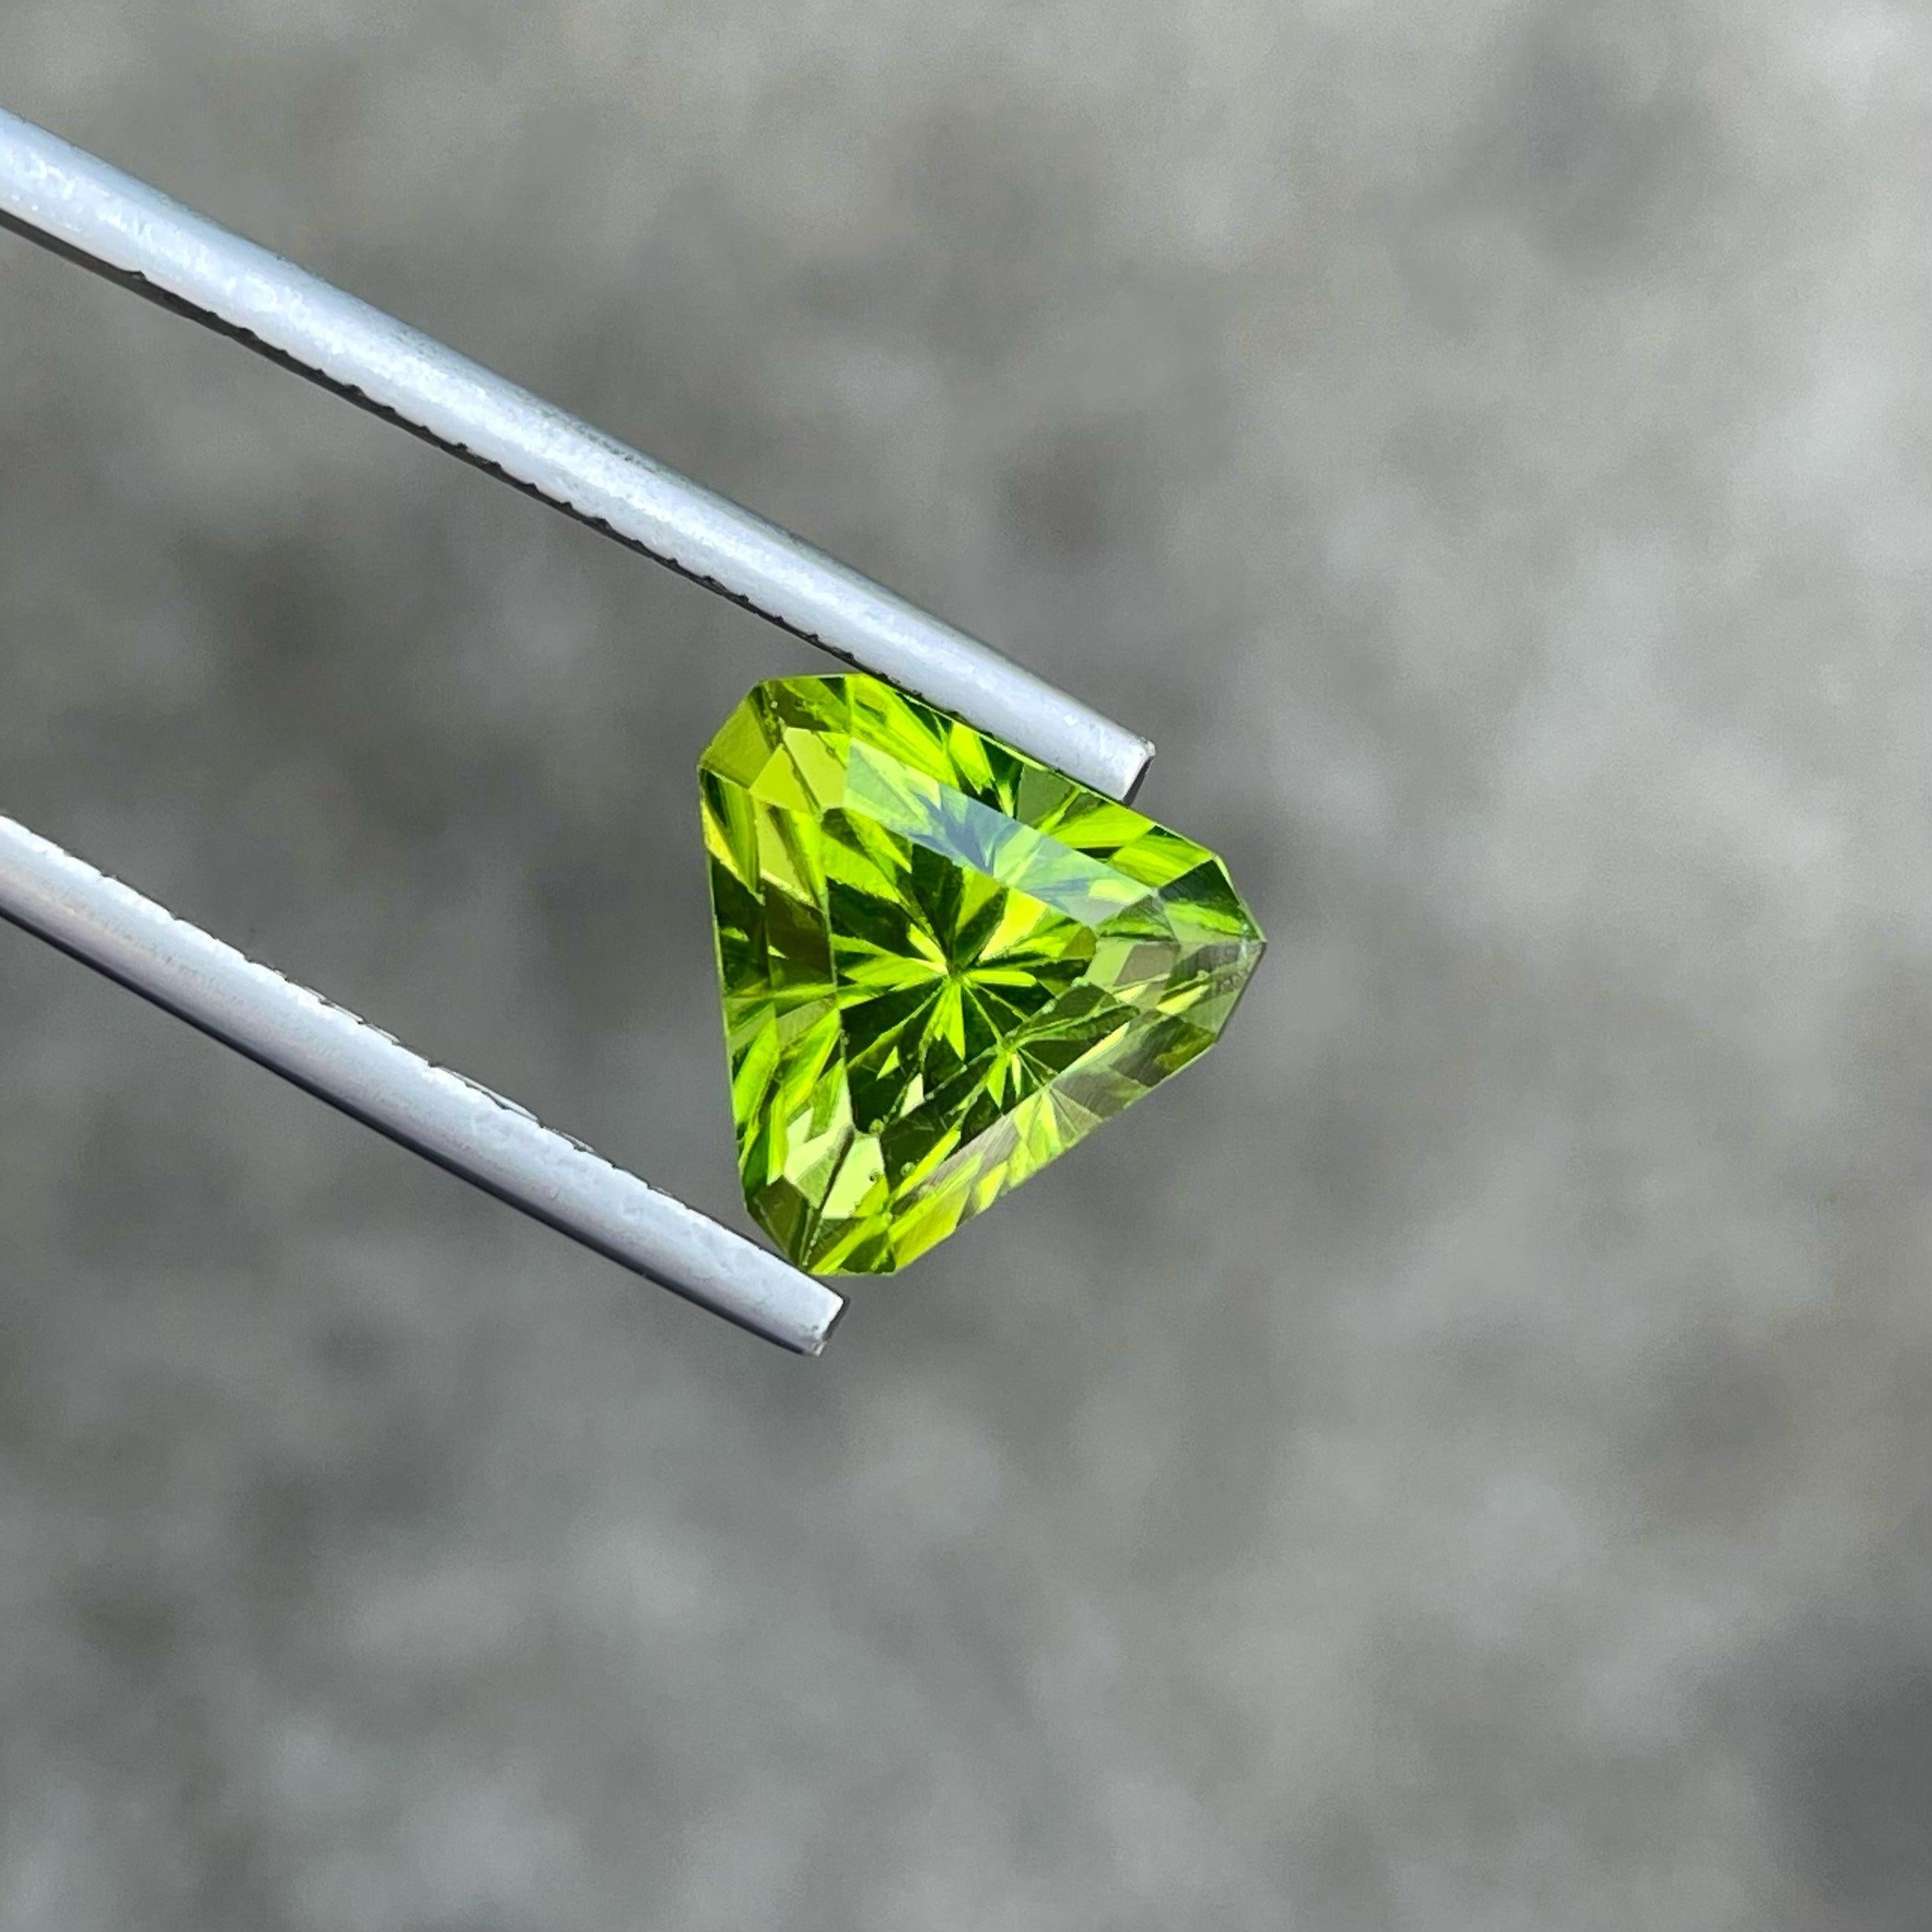 Fantastic Trilliant Cut Natural Peridot Gemstone of 4.75 carats from Pakistan has a wonderful cut in a  Triangular shape, incredible Green color. Great brilliance. This gem is SI Clarity.

Product Information:
GEMSTONE TYPE:	Fantastic Trilliant Cut